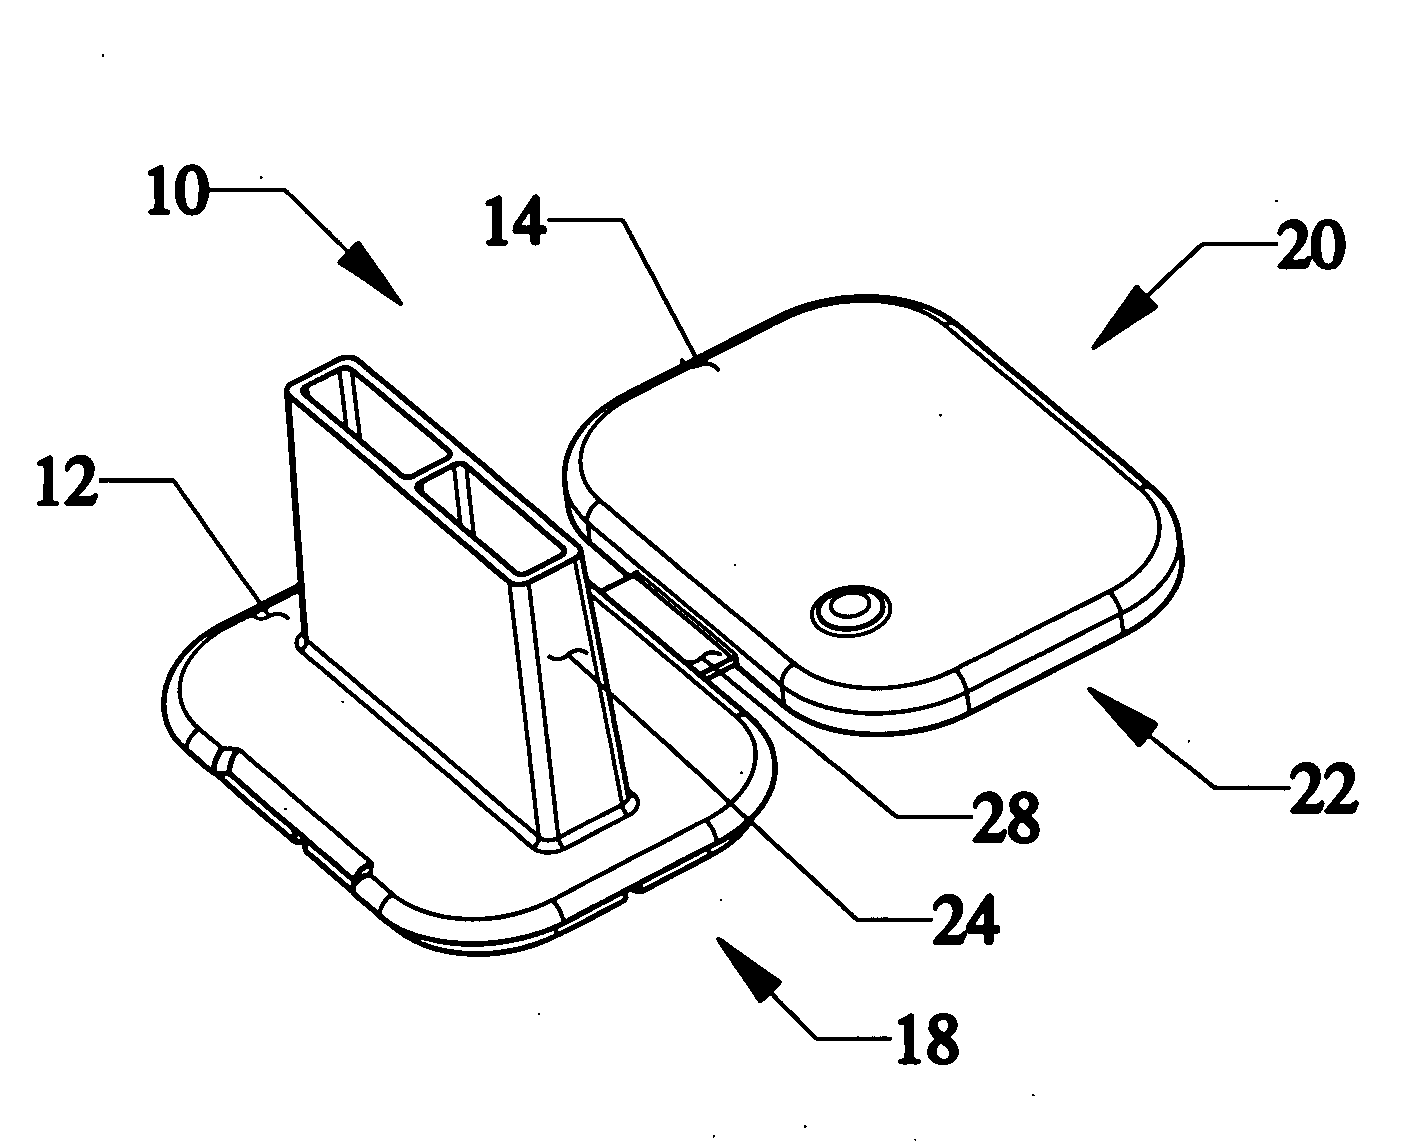 Film and storage plate protection systems and methods